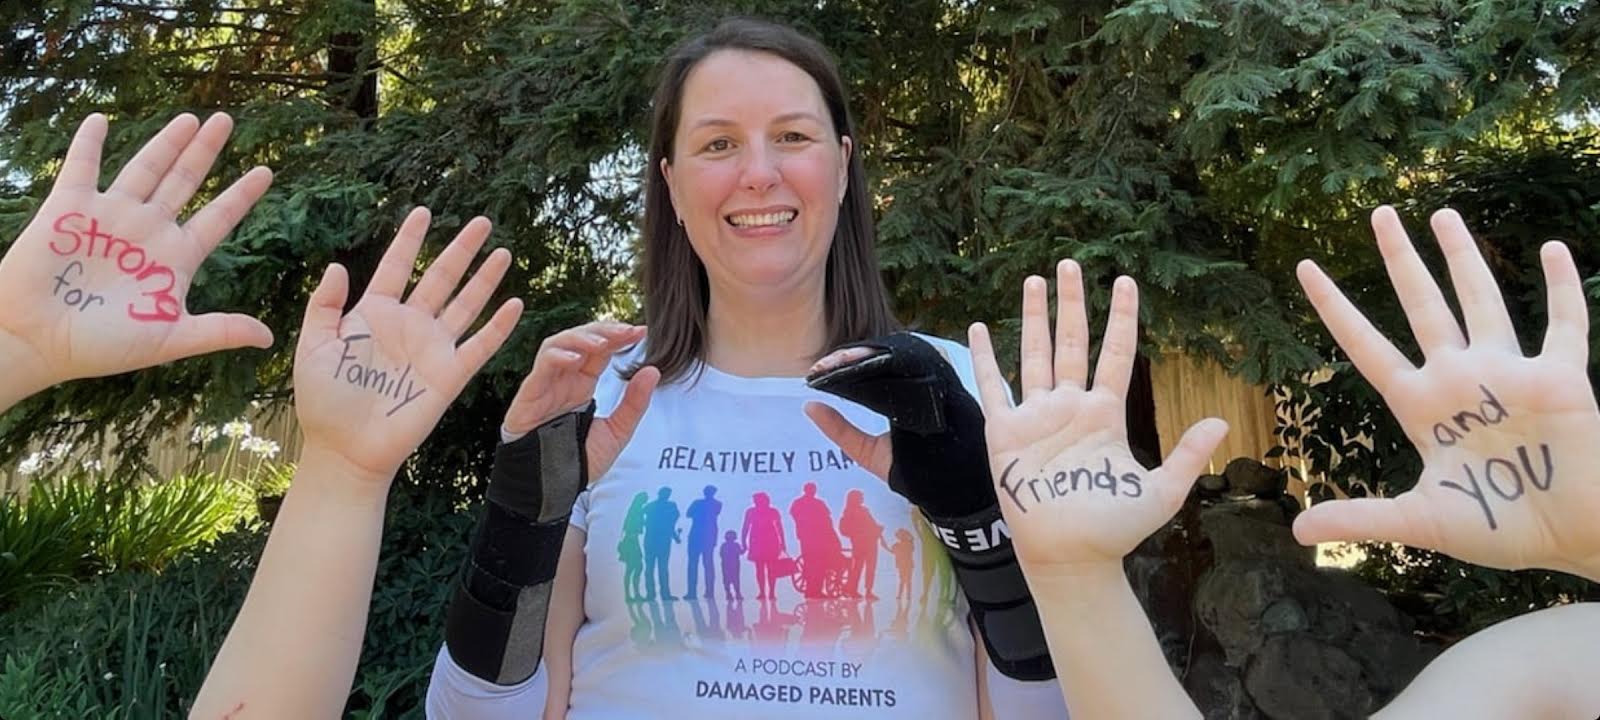 Angela standing in front of redwoods wearing a white t-shirt which says Relatively Damaged with pastel rainbow people of all abilities, shapes and sizes. She is holding up her hands wrapped in black braces with four other hands in picture written on their palms "strong for family friends and you"